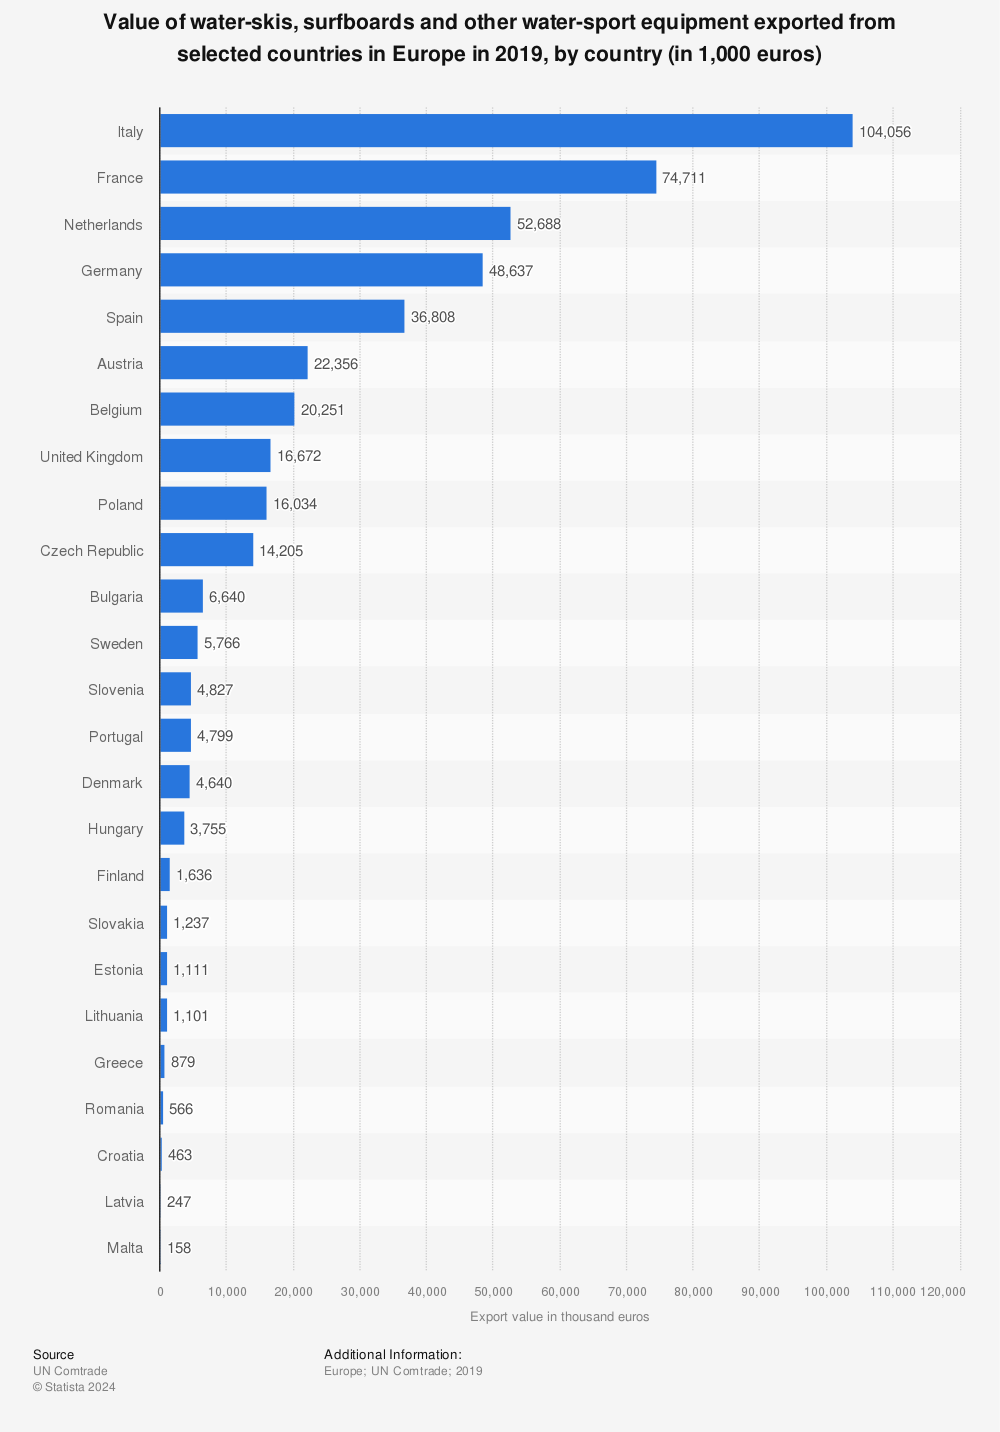 Statistic: Value of water-skis, surfboards and other water-sport equipment exported from selected countries in Europe in 2019, by country (in 1,000 euros) | Statista